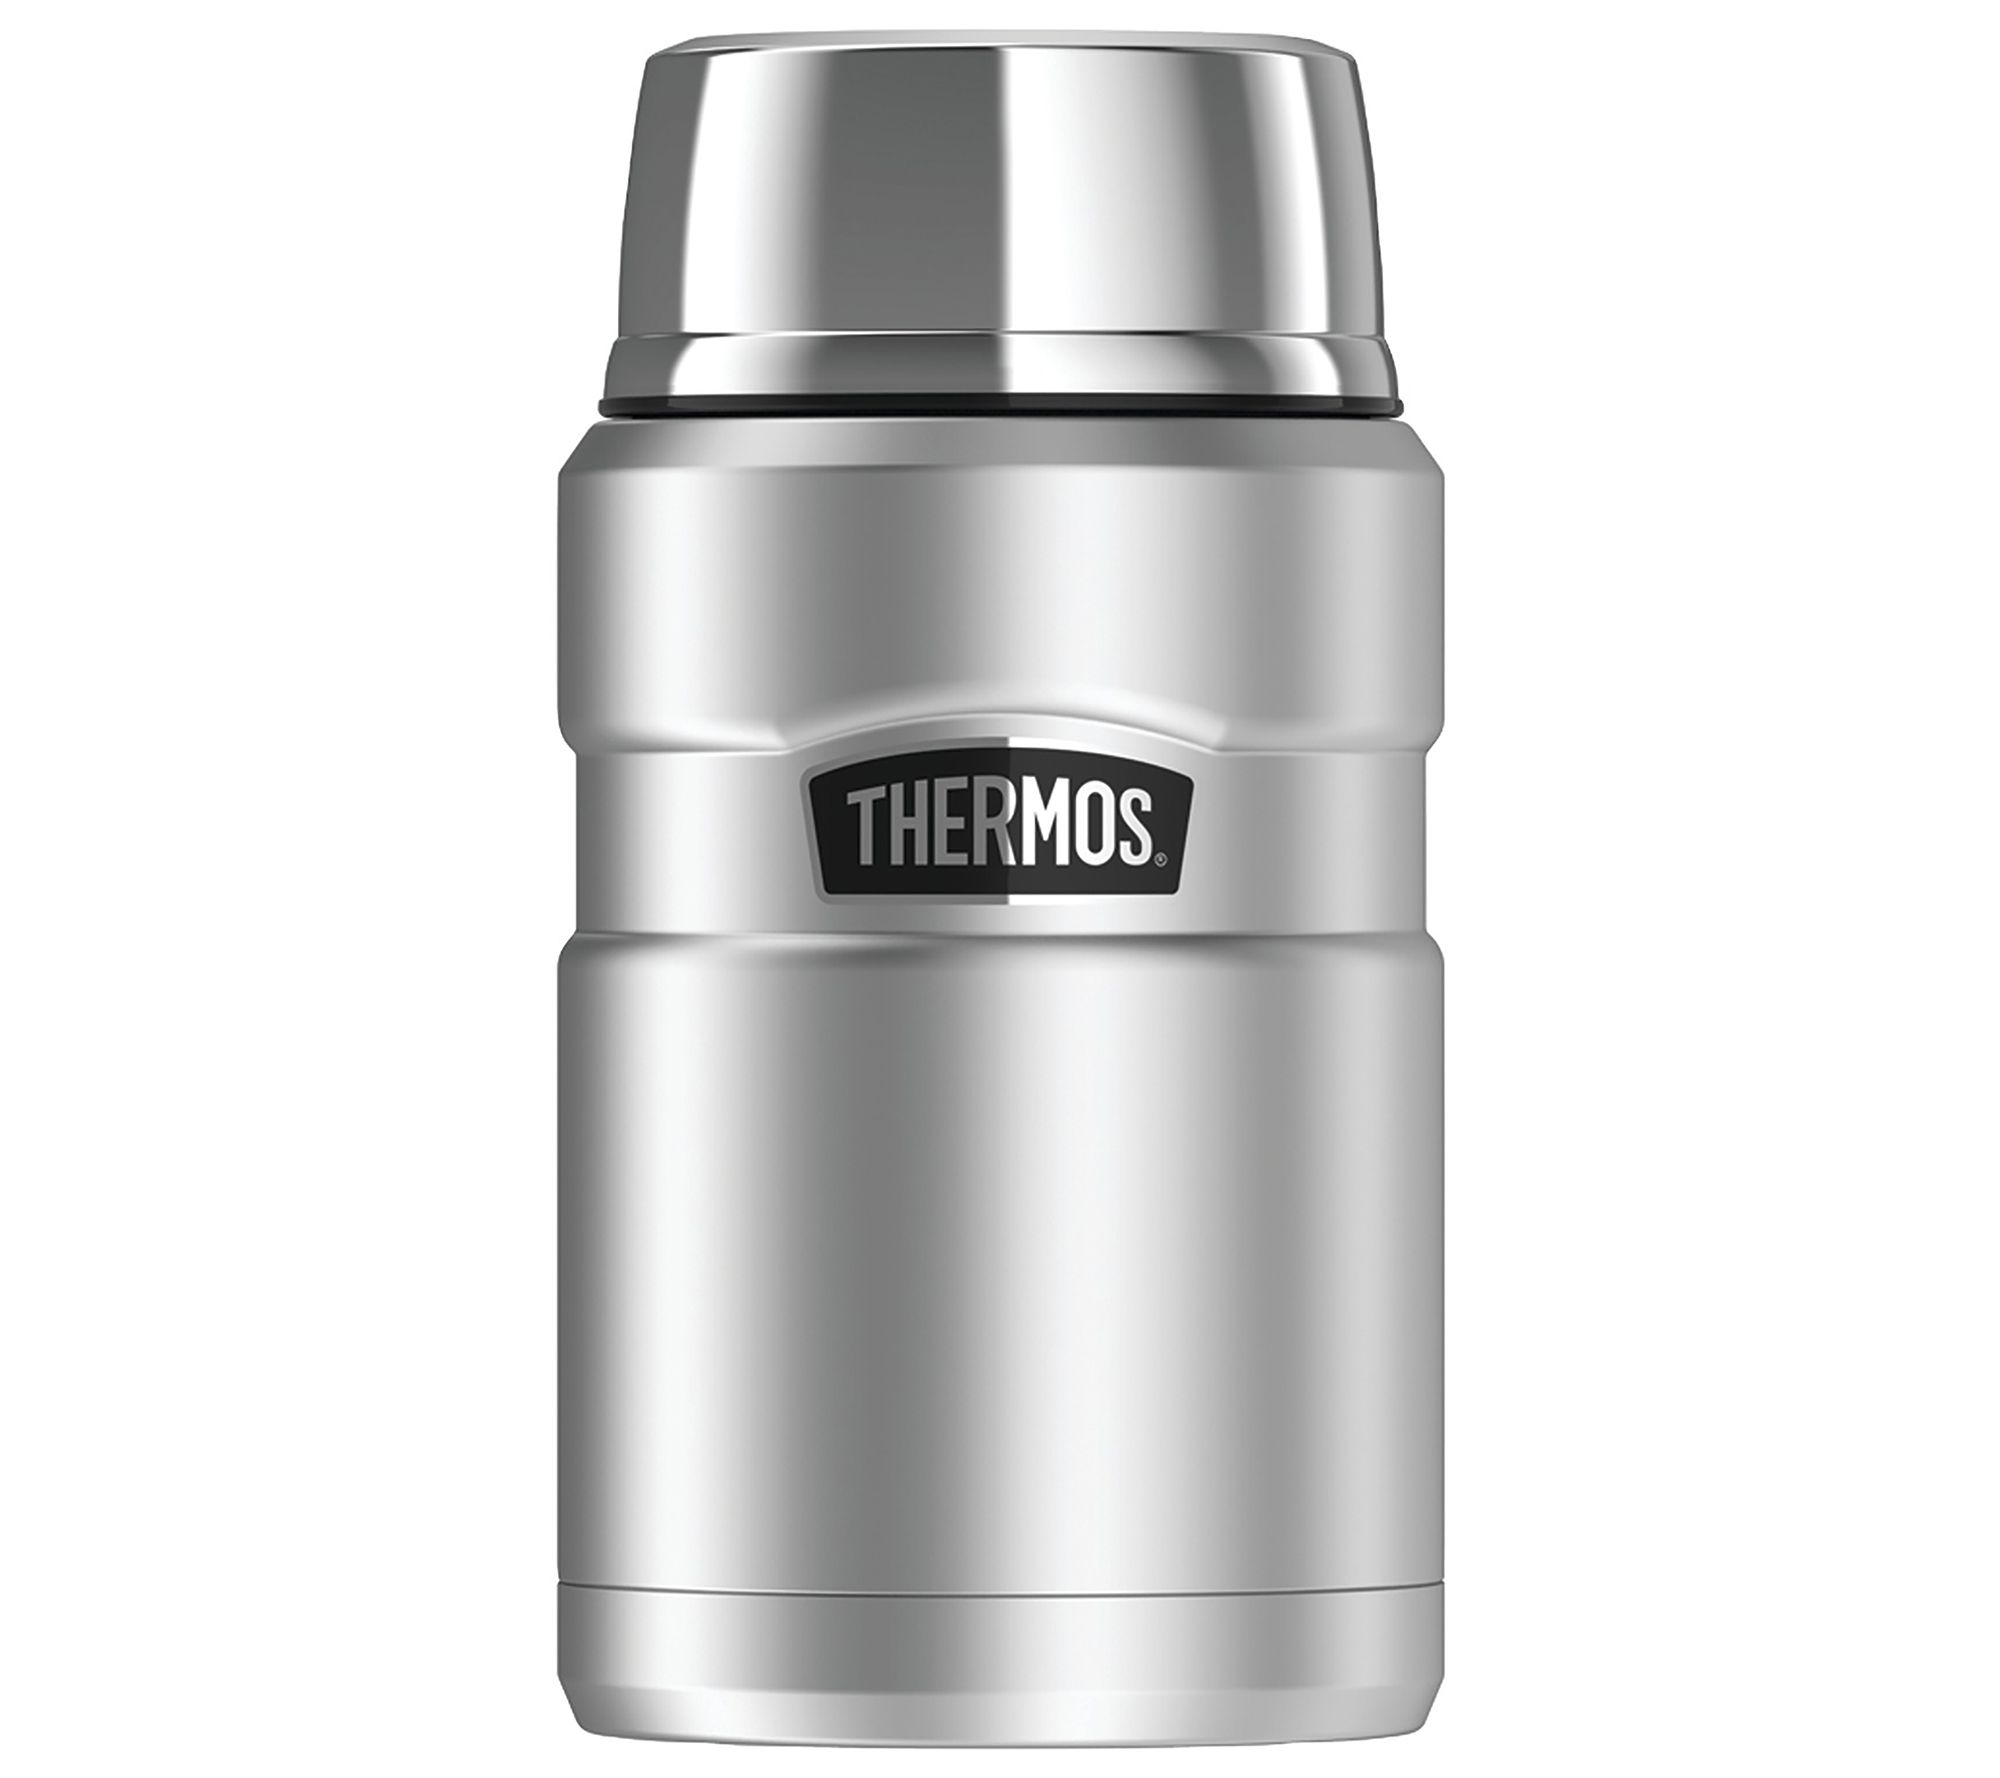 Thermos Baby 7 oz. Vacuum Insulated Stainless Steel Food Jar - Gray